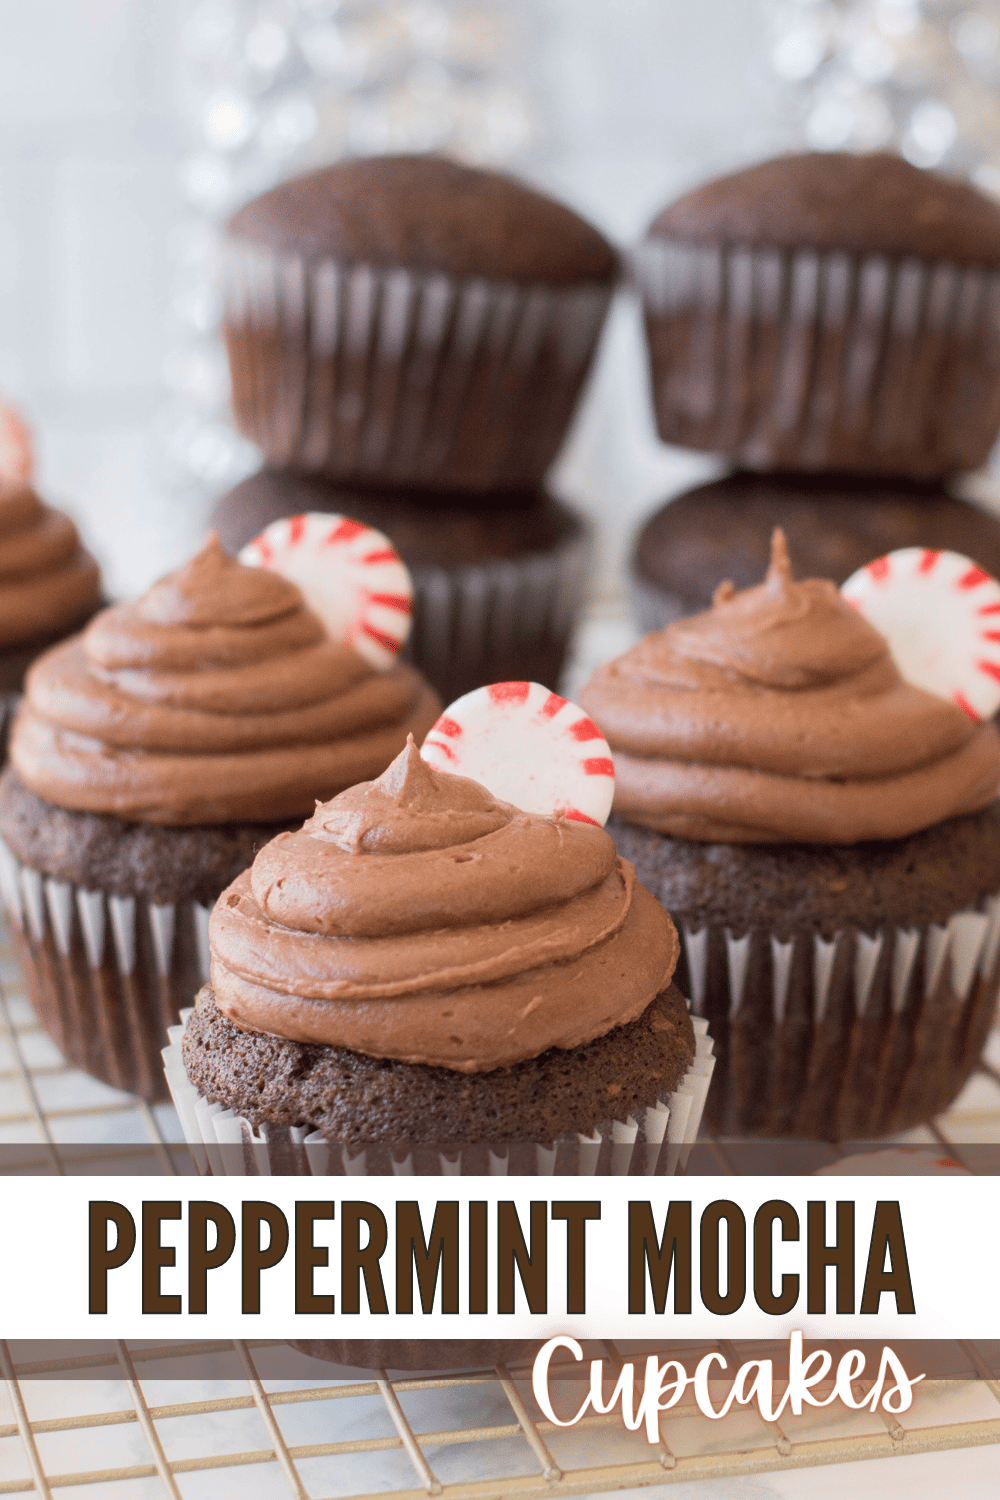 These Peppermint Mocha Cupcakes are a delightful holiday dessert! The cupcakes are moist and fluffy, with a rich chocolate flavor! #peppermintmochacupcakes #peppermint #mocha #cupcakes #christmasrecipe via @wondermomwannab